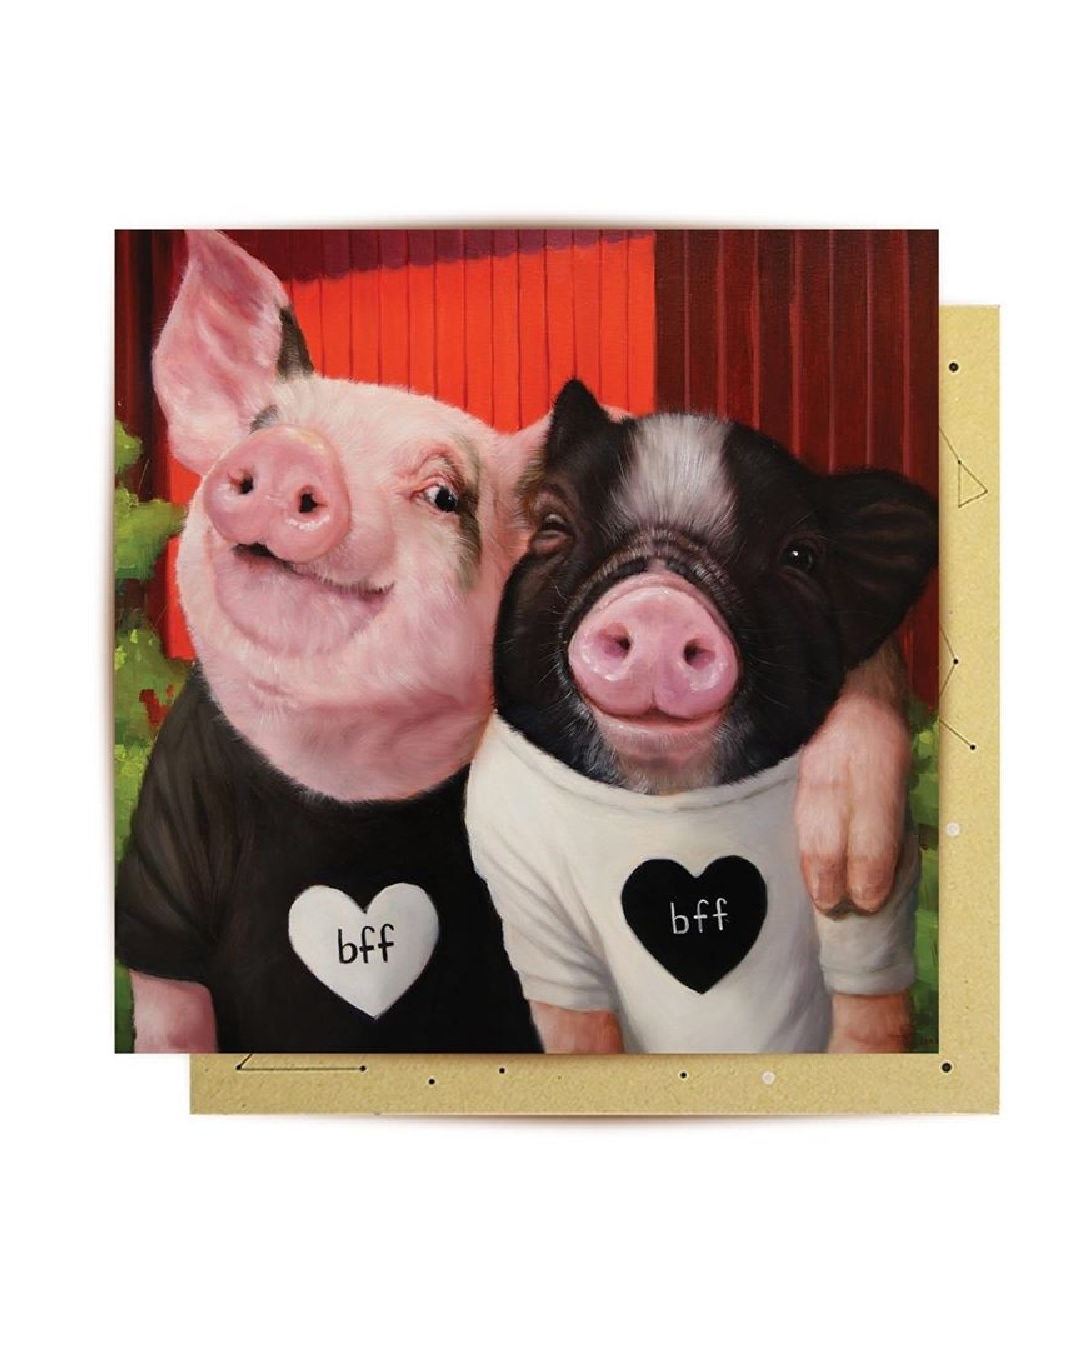 Card with 2 pigs with arms around each other and BFF on tshirts